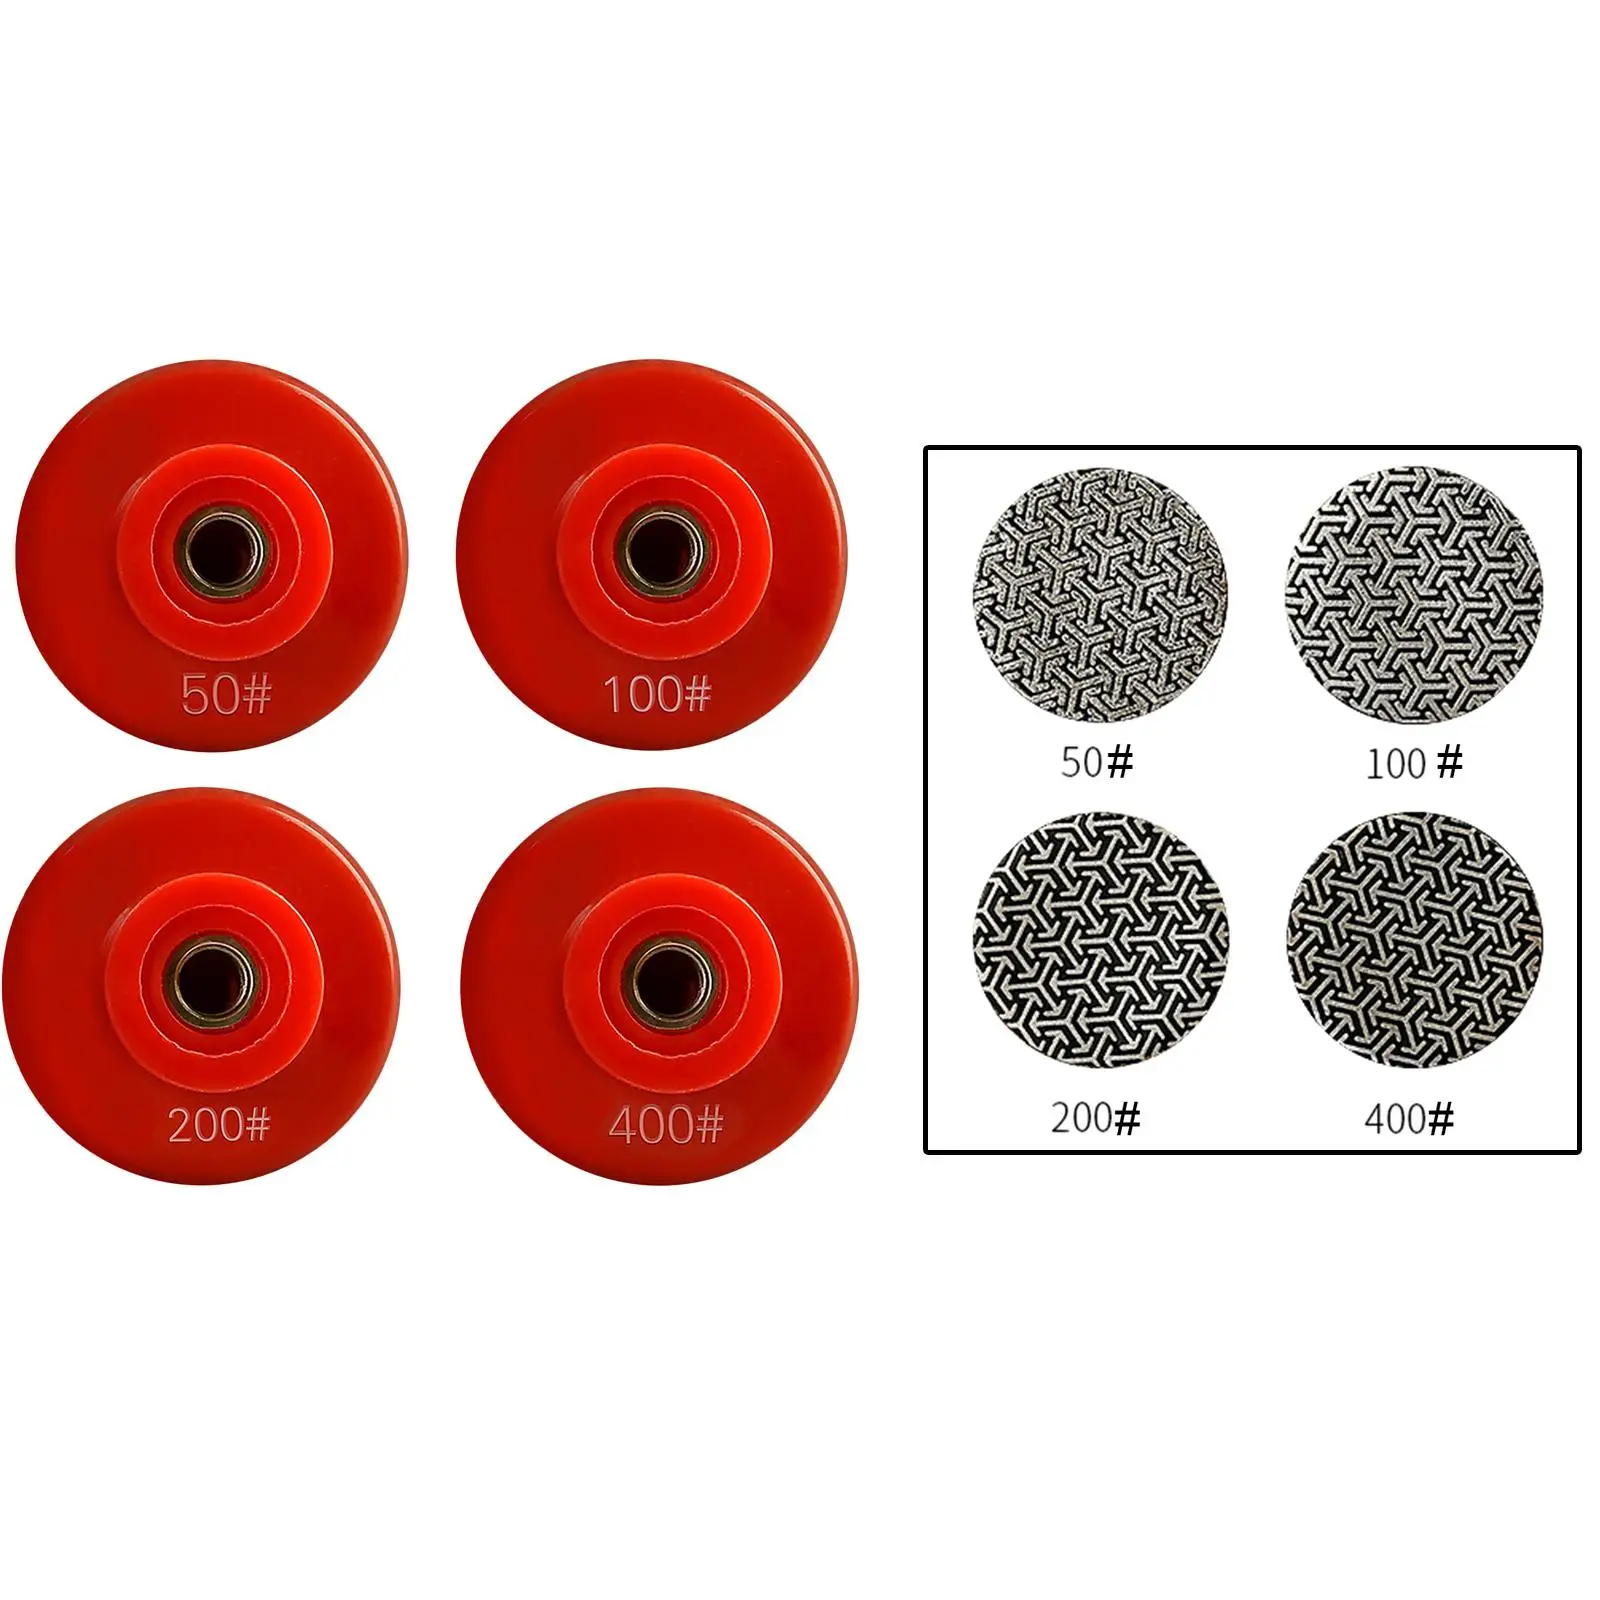 2inch Angle Grinder Diamond Grinding Disc Accessory Nylon Shell 10mm Thread for Granite Marble Ceramic Tile Convenient Assemble